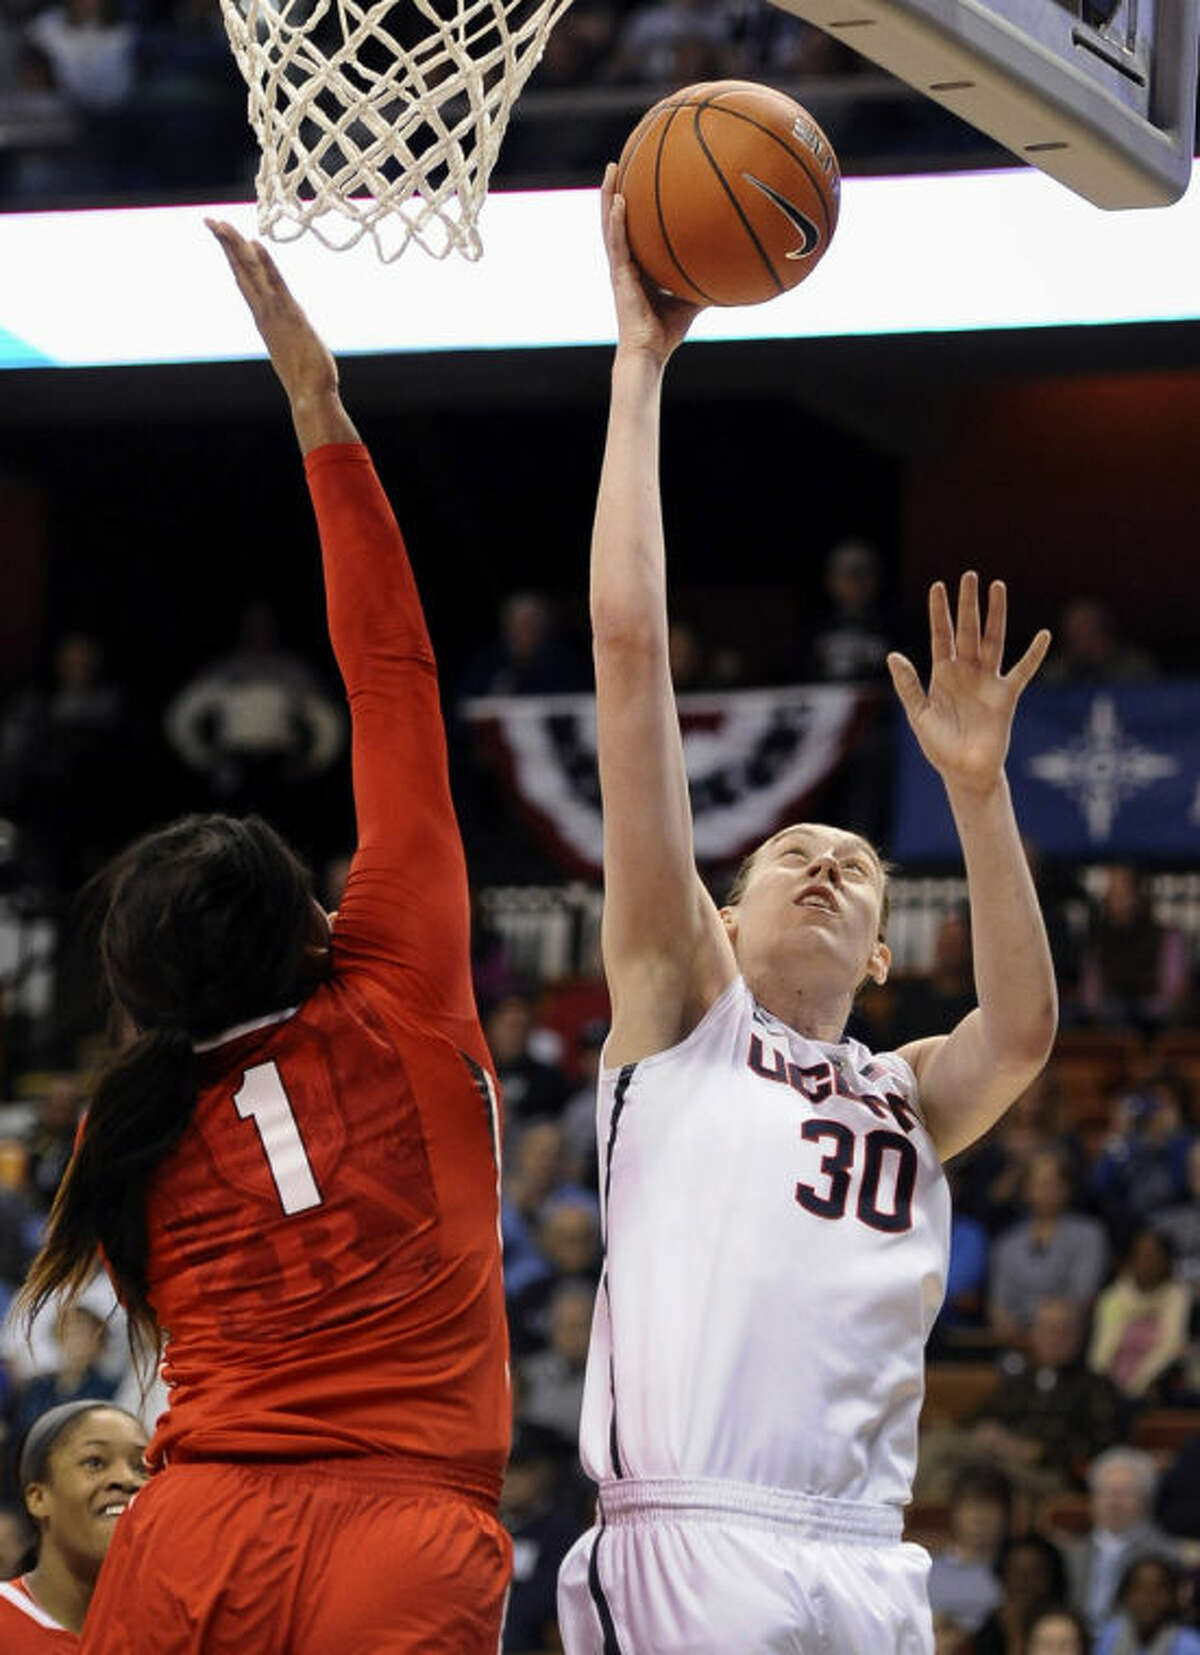 Connecticut's Breanna Stewart, right, scores as Rutgers' Rachel Hollivay, left, defends during the first half of an NCAA college basketball game in the semifinals of the American Athletic Conference women's tournament, Sunday, March 9, 2014, in Uncasville, Conn. (AP Photo/Jessica Hill)